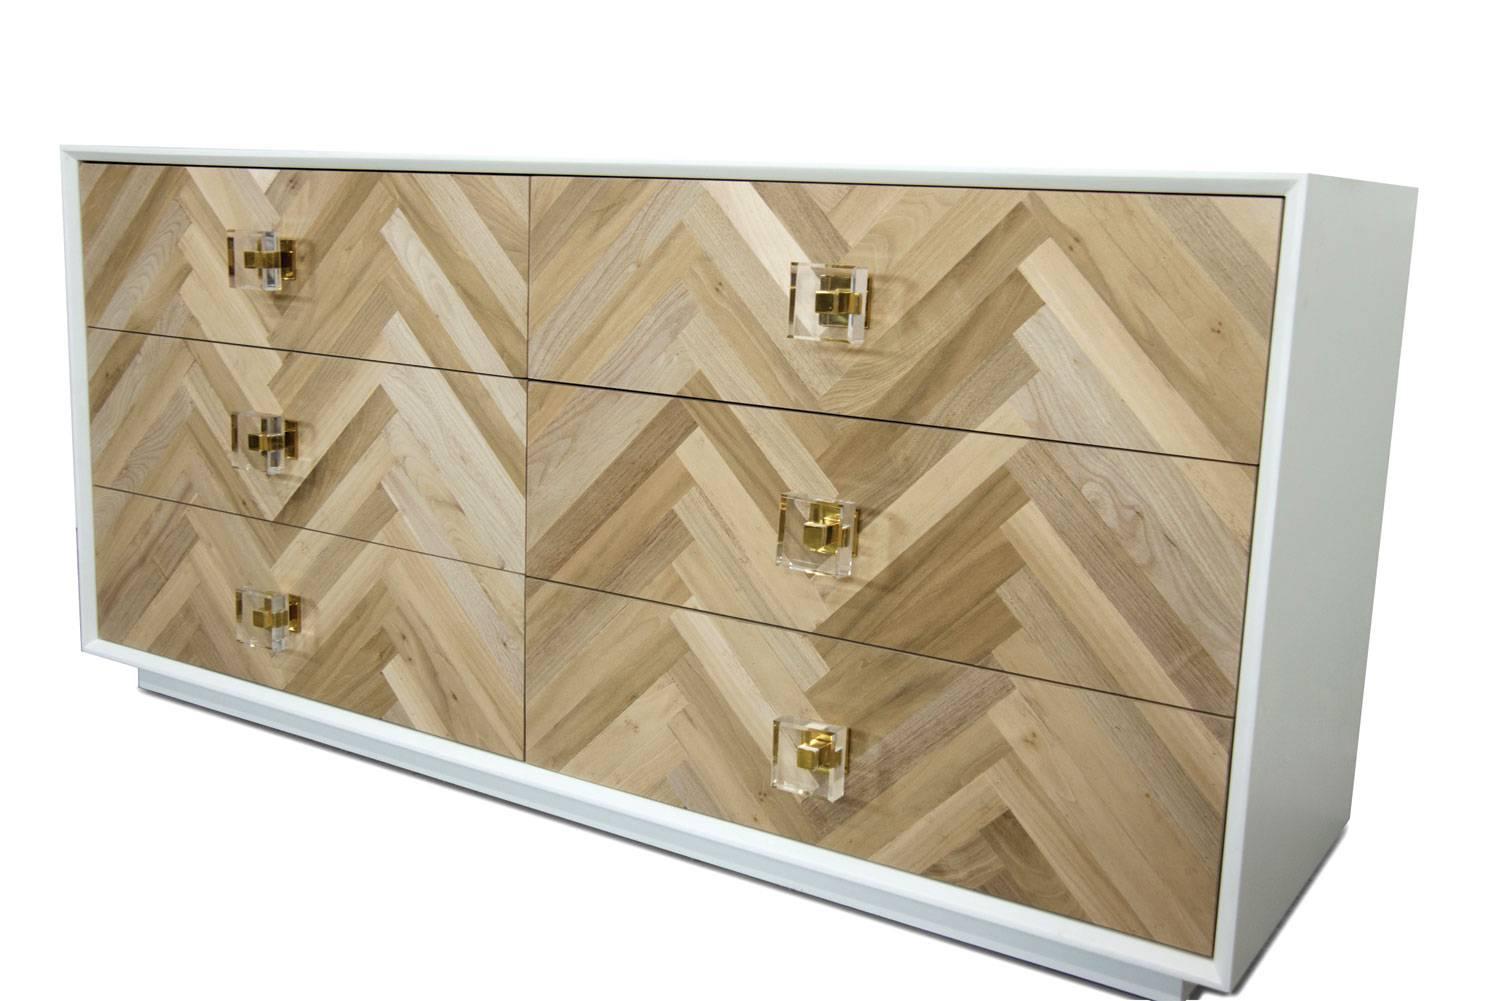 Our stylish new Amalfi dresser creates a solution to your storage needs. The door face is made of bleached walnut laid in chevron pattern. Together with matte white box and our beautiful brass and Lucite knobs creates the perfect mix of style and